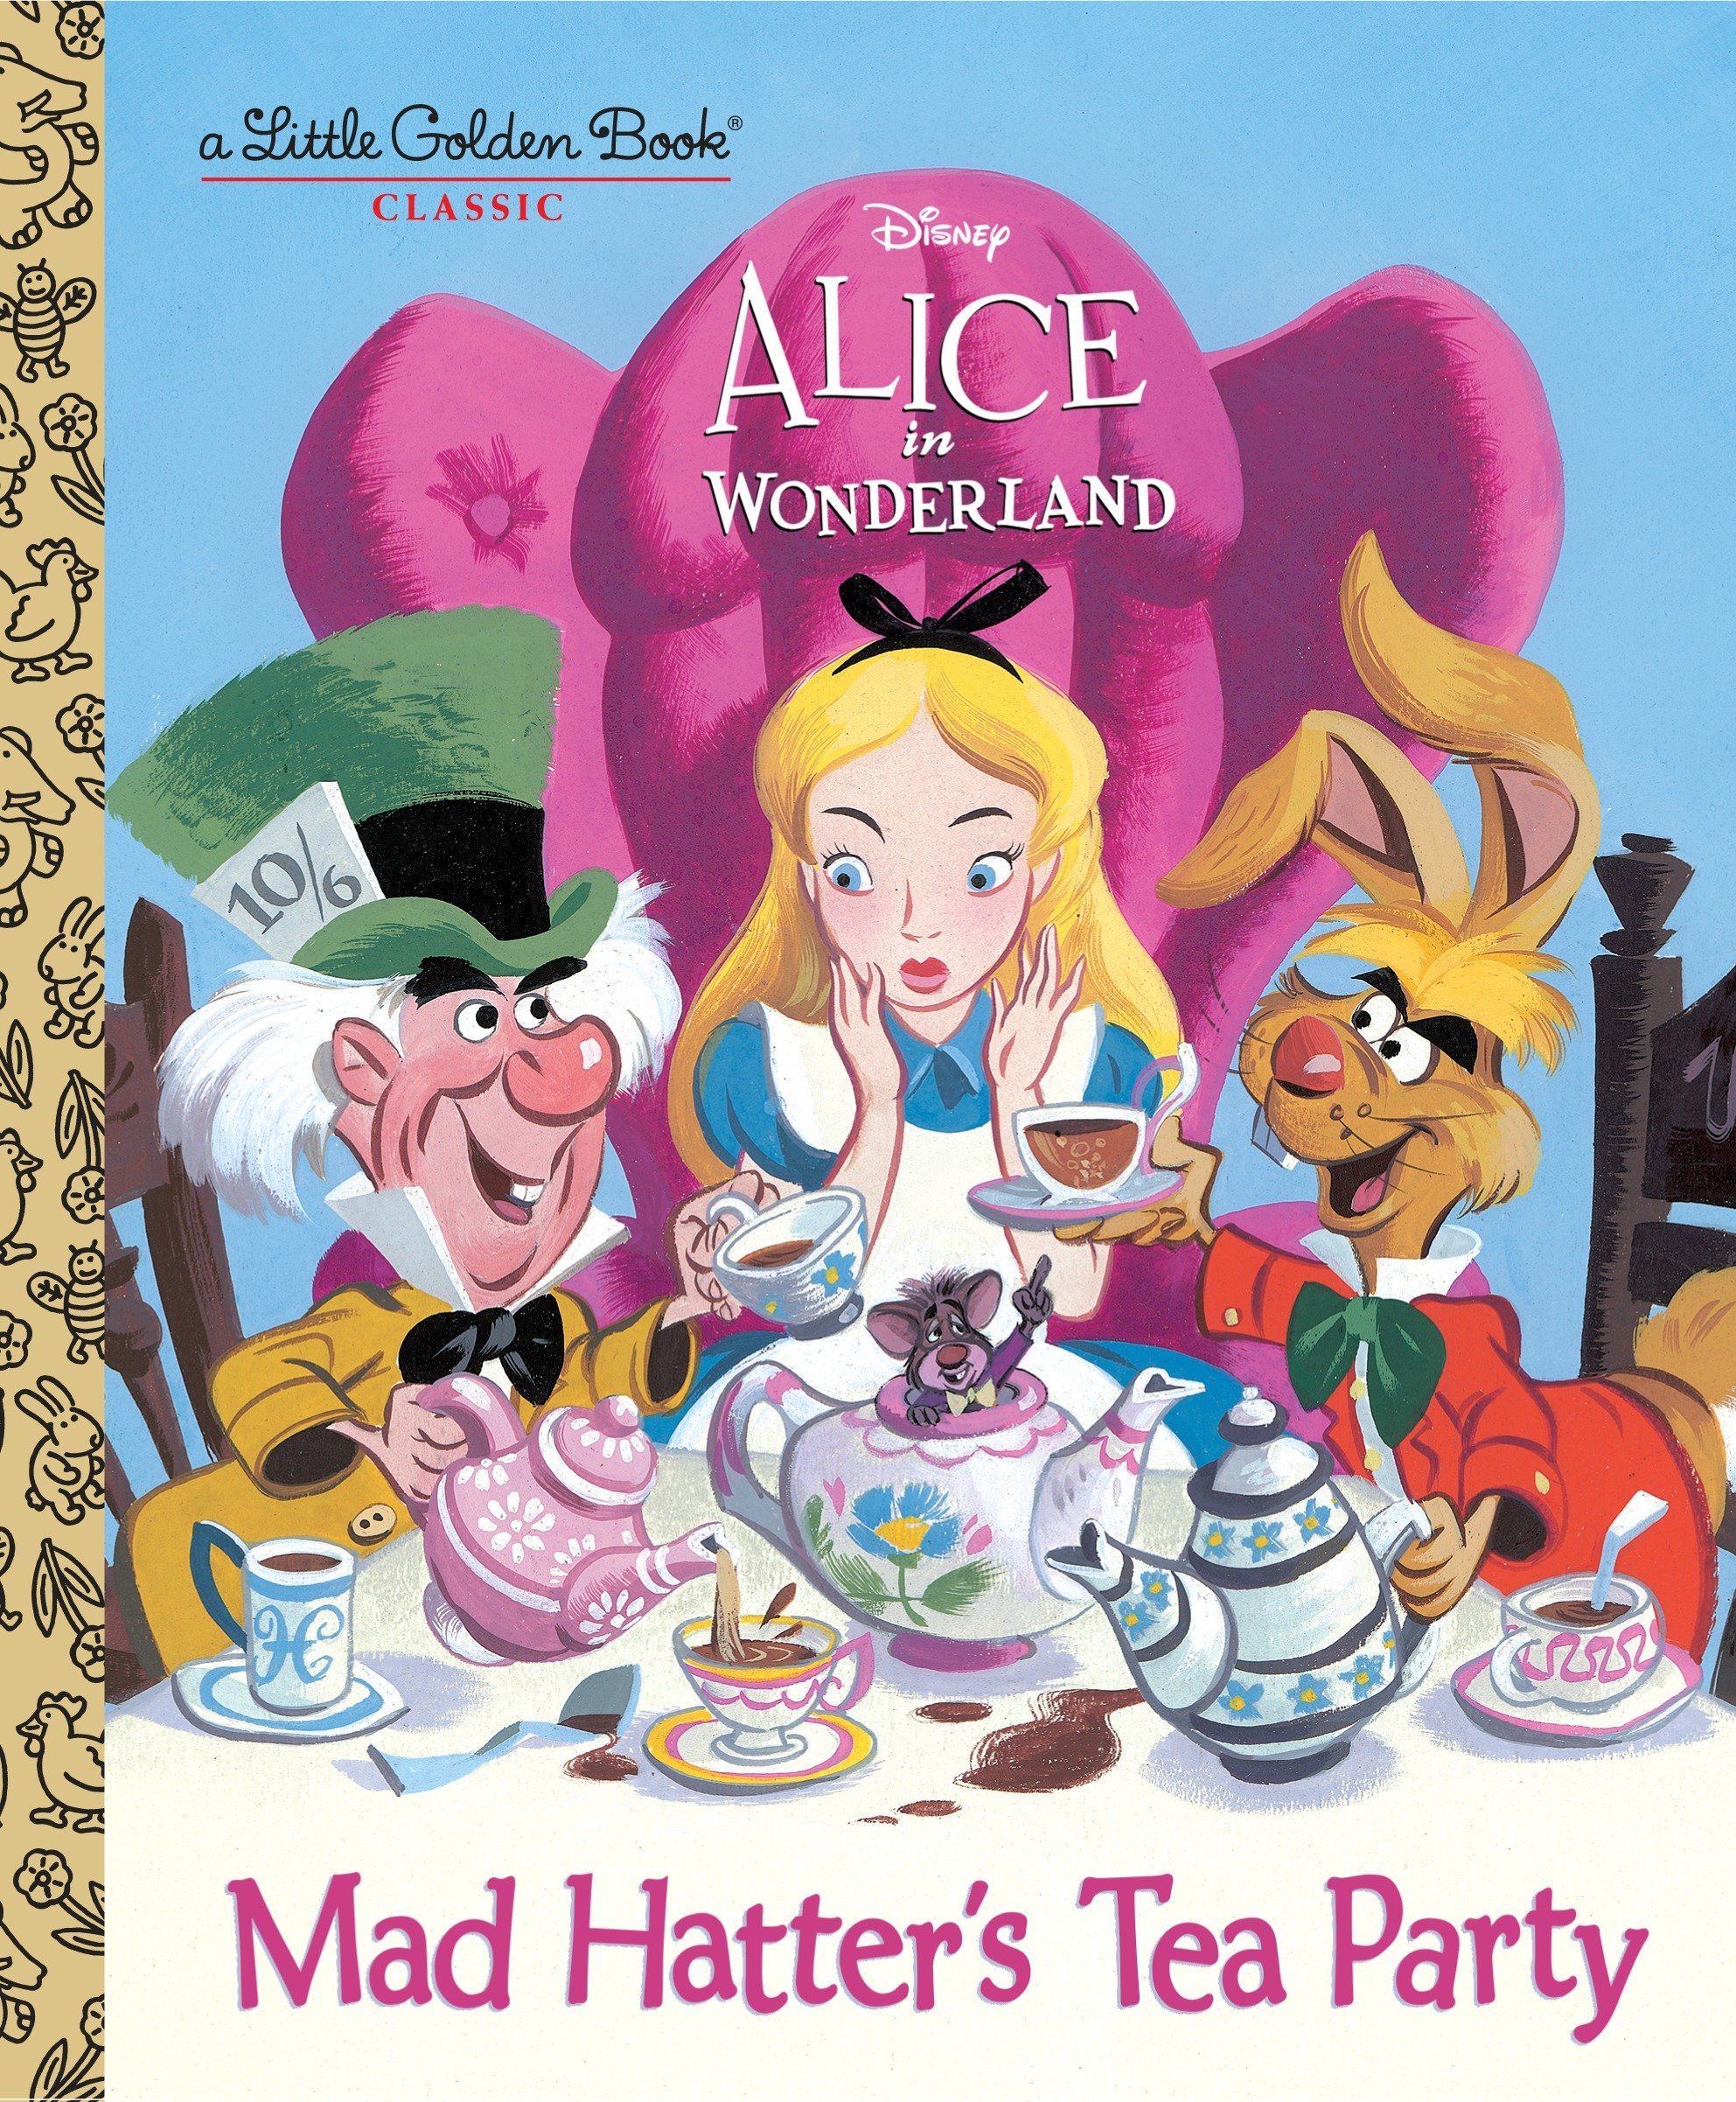 Mad Hatter’s Tea Party